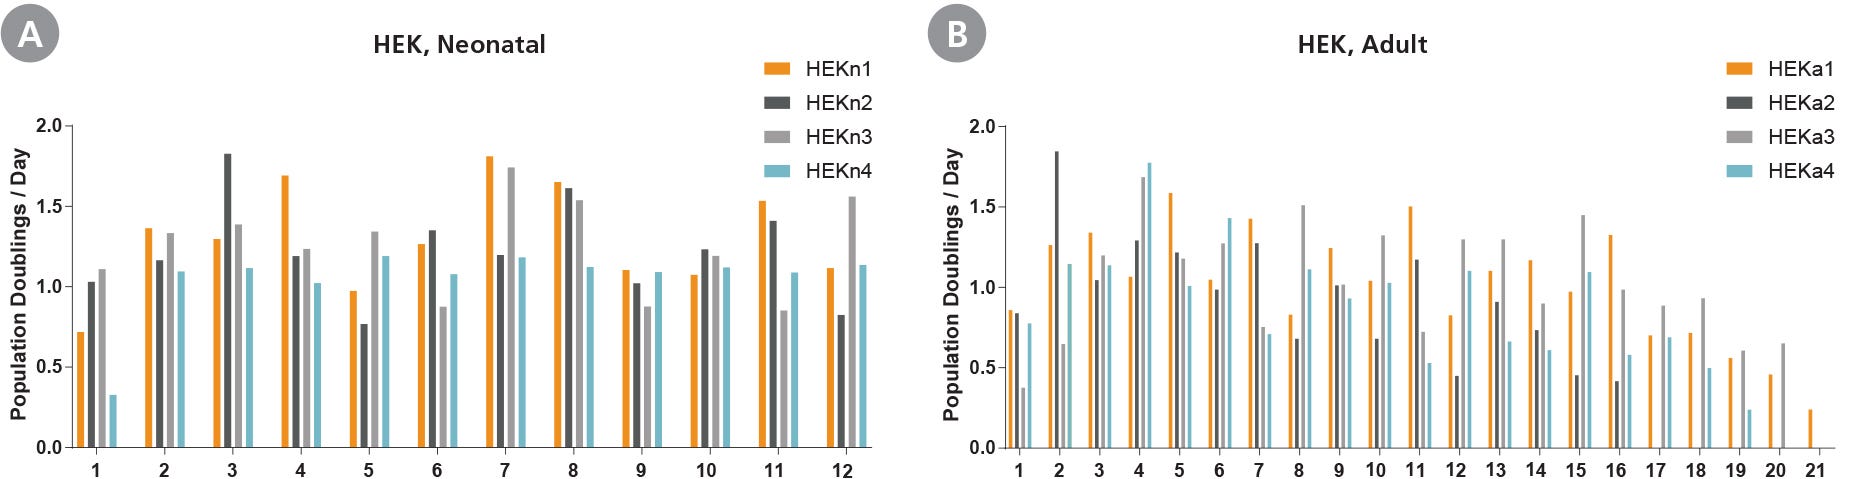 Population doublings/day of neonatal and adult HEKs cultured in DermaCult™ Keratinocyte Expansion Medium over long-term culture.